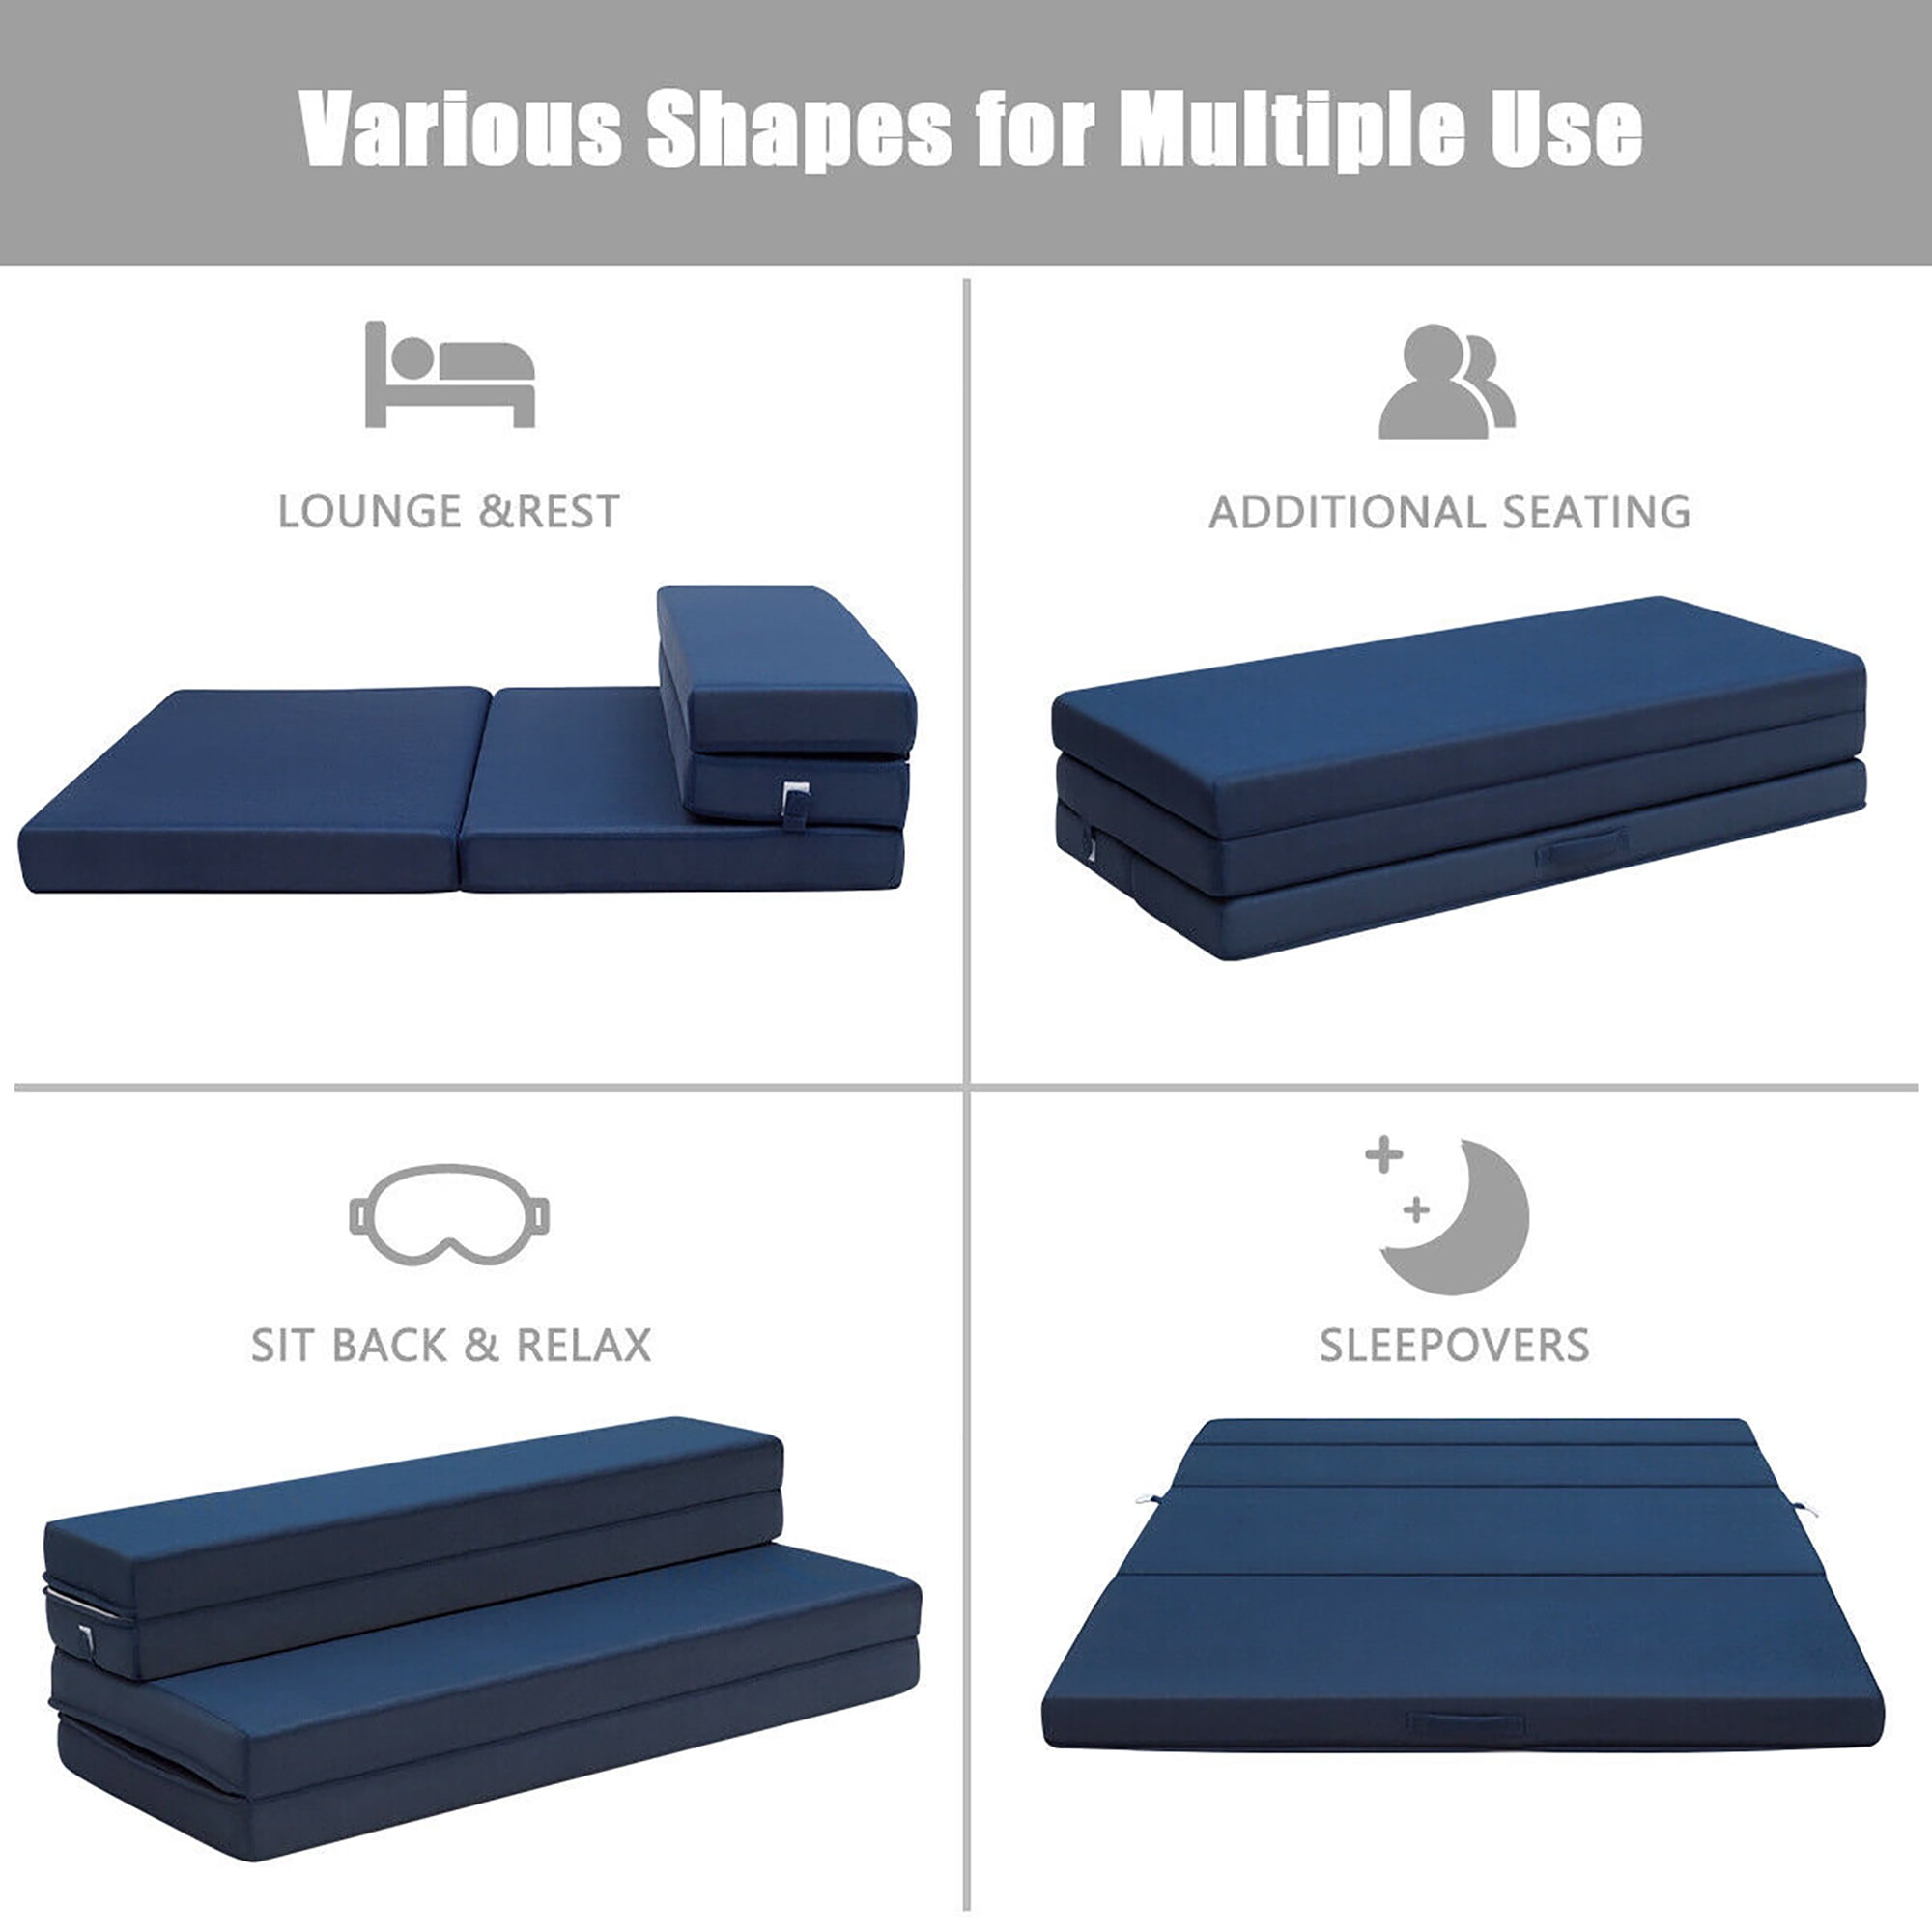 Non Slip Bottom Folding Guest Bed Sleepover Roll Out Pad Matching Bedrooms Futon Foldable Mattress Blue, Single 75cm X 190cm Soft Cotton Hypoallergenic Back and Neck Support 